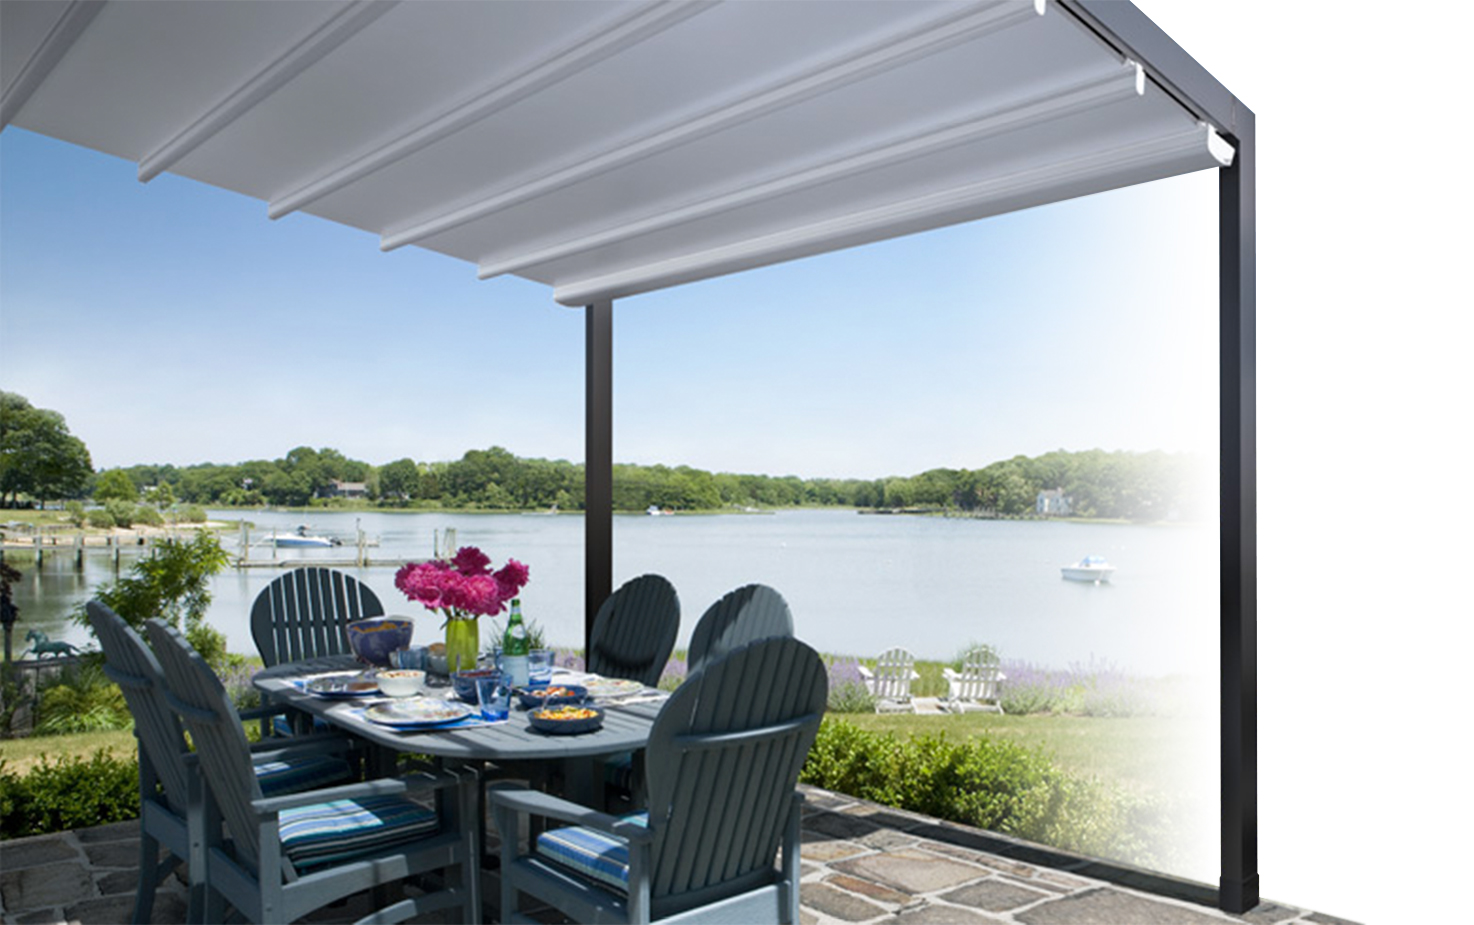 Retractable Canopies Alfresco Specialists | Awnings ...